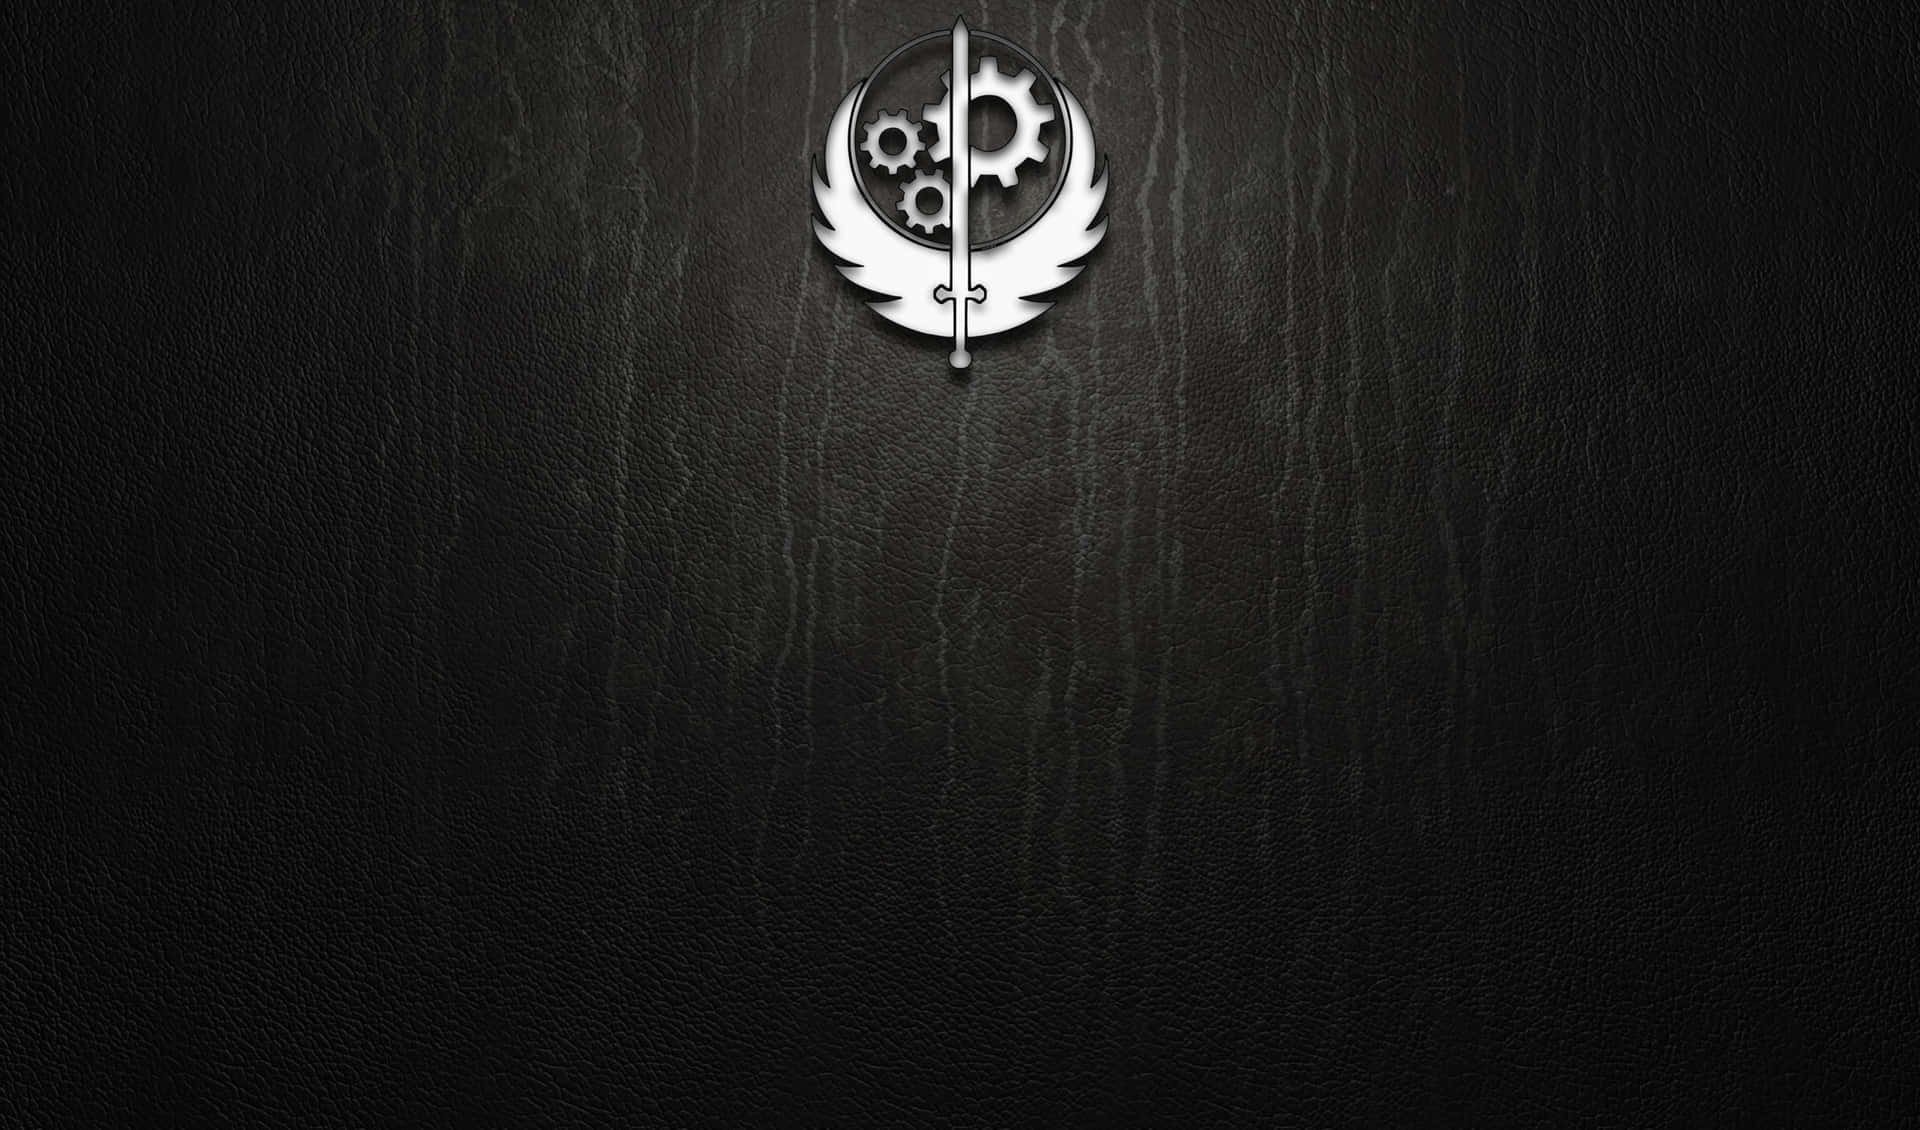 Brotherhood of Steel soldier in an apocalyptic wasteland Wallpaper